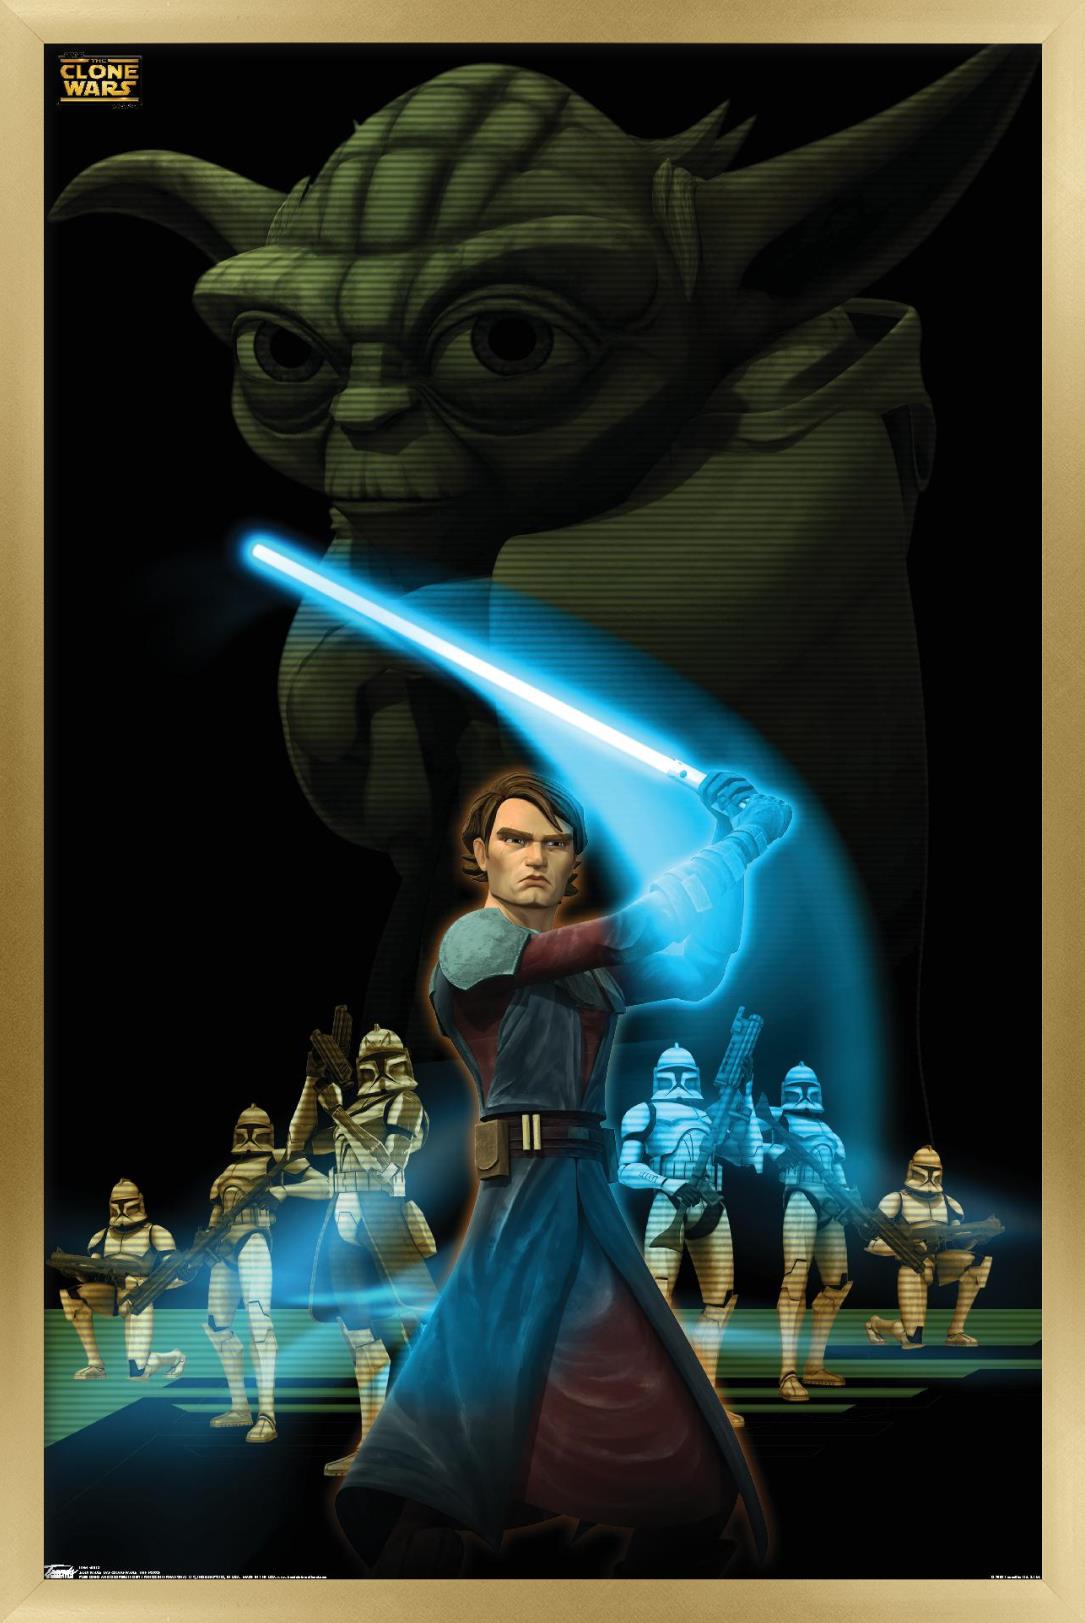 Star Wars: The Clone Wars - The Force Wall Poster, 22.375" x 34", Framed - image 1 of 5